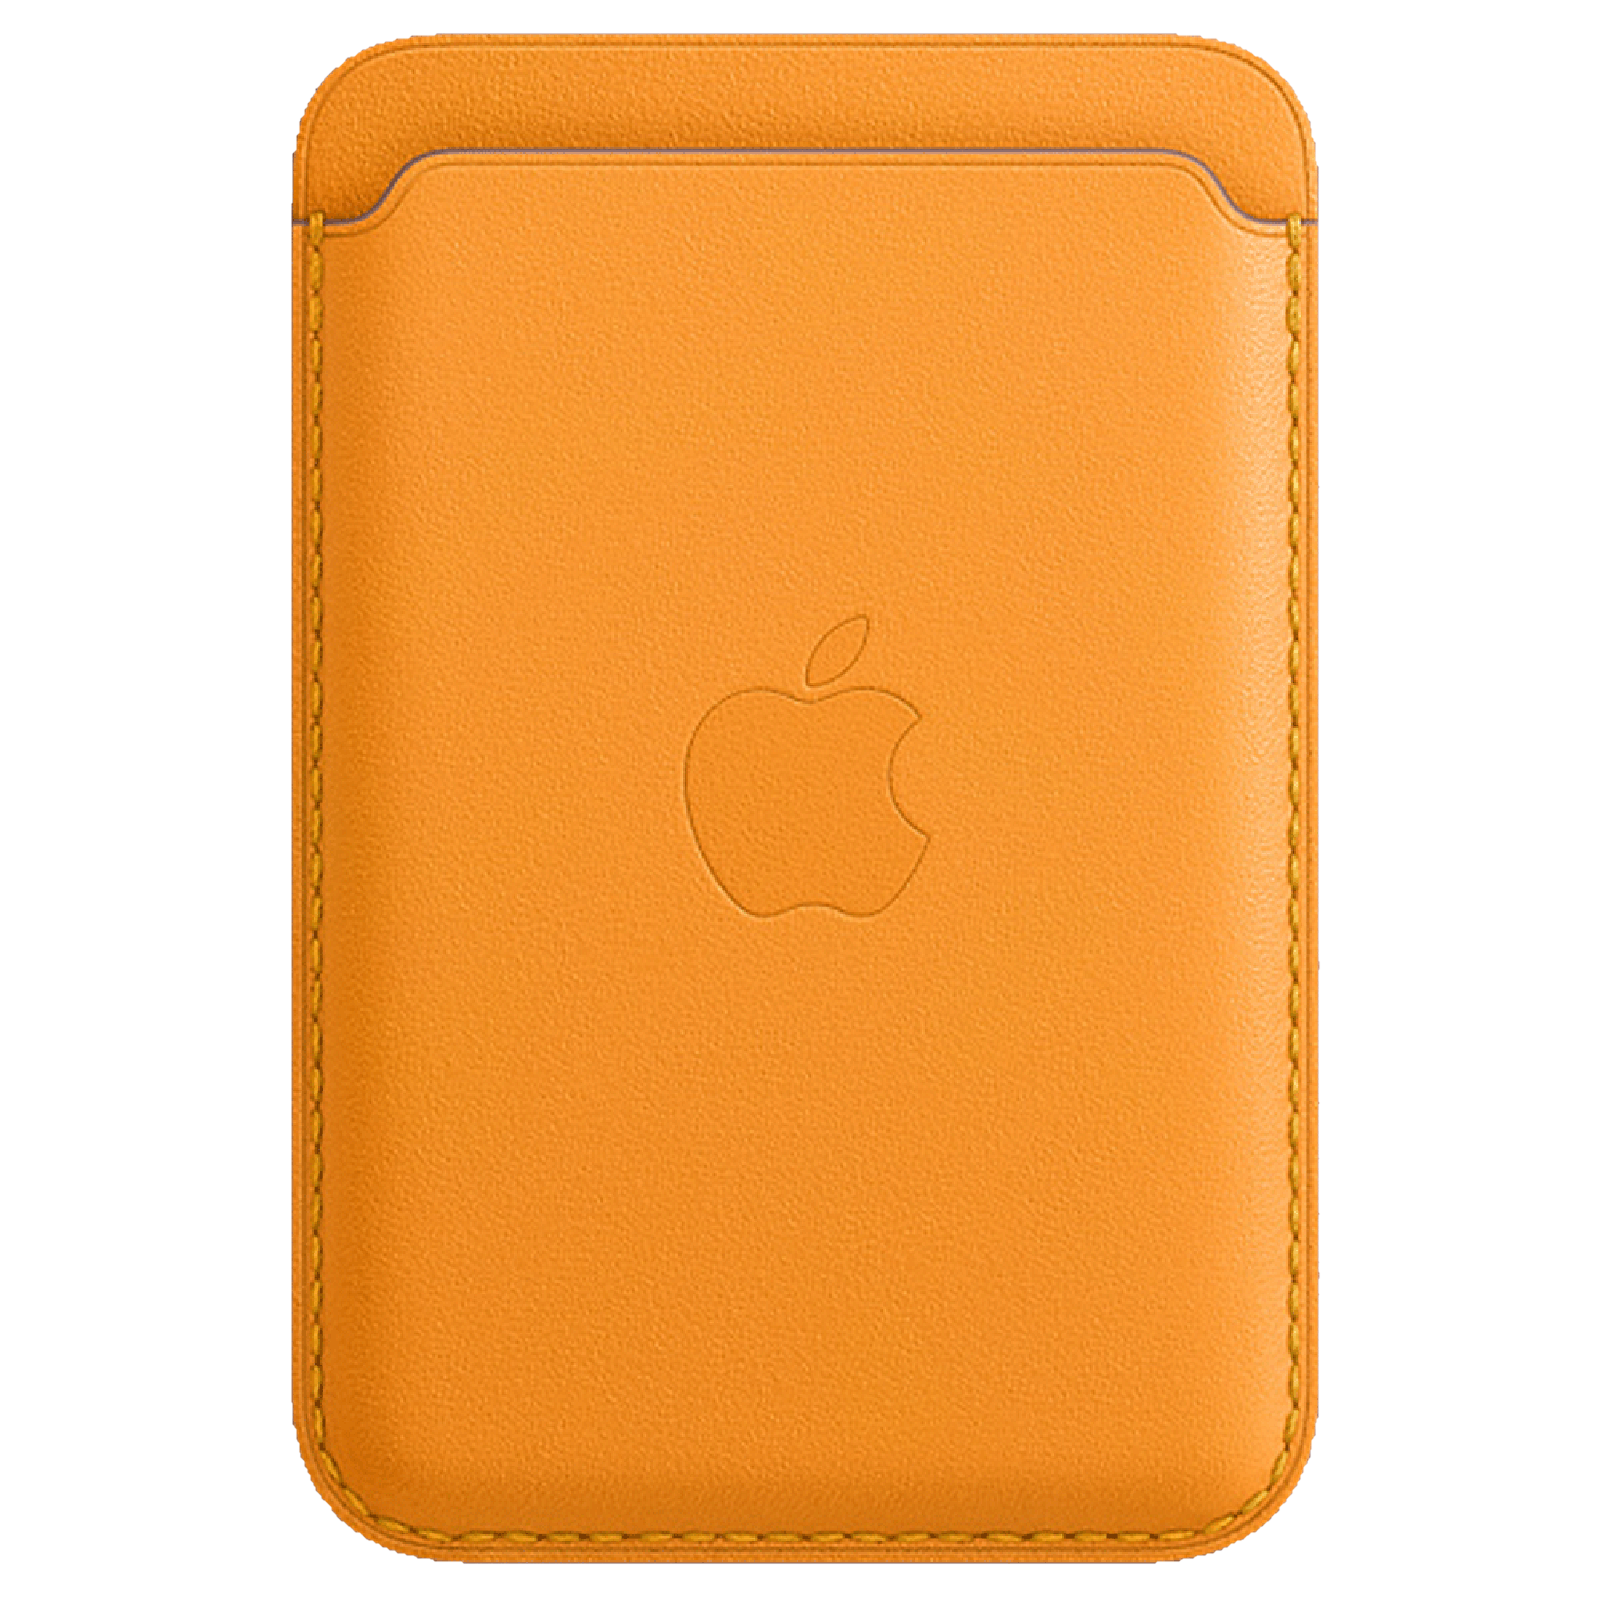 Buy Apple MagSafe Leather Wallet for iPhone 12, 12 Pro Max, 12 Pro, 12 Mini  (Strong Built-in Magnets, California Poppy) Online - Croma